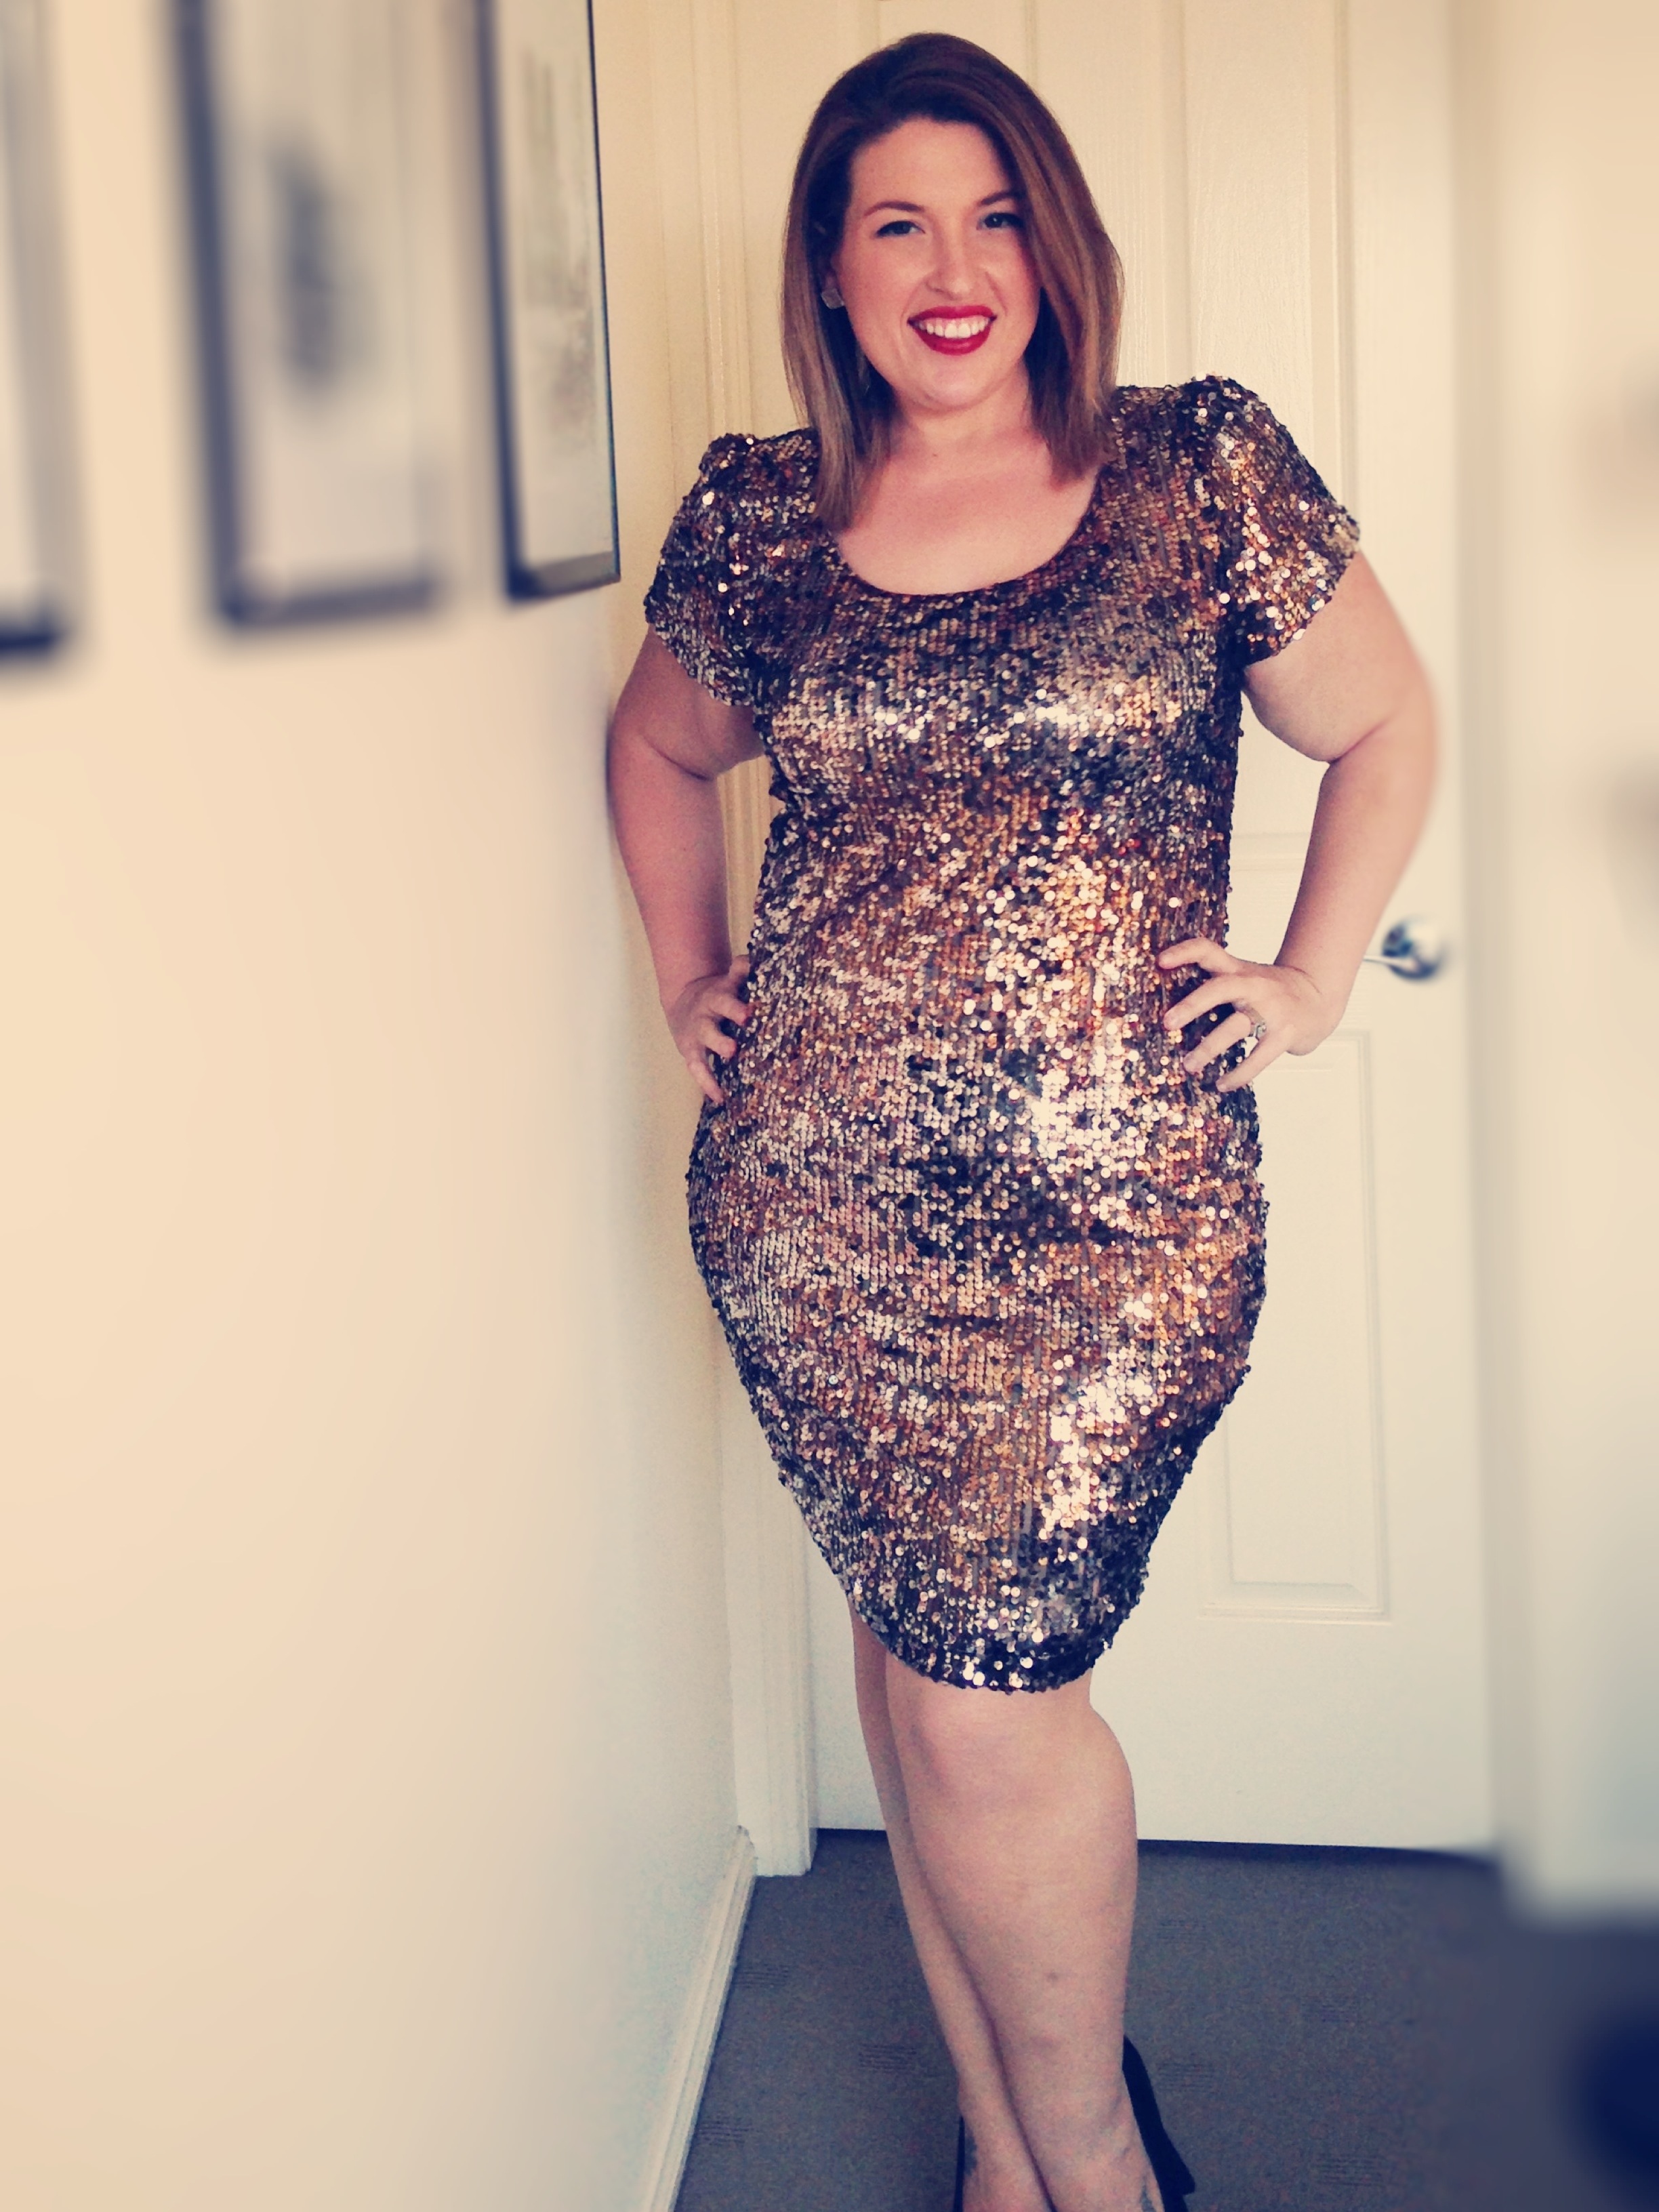 black and silver sequin dress plus size